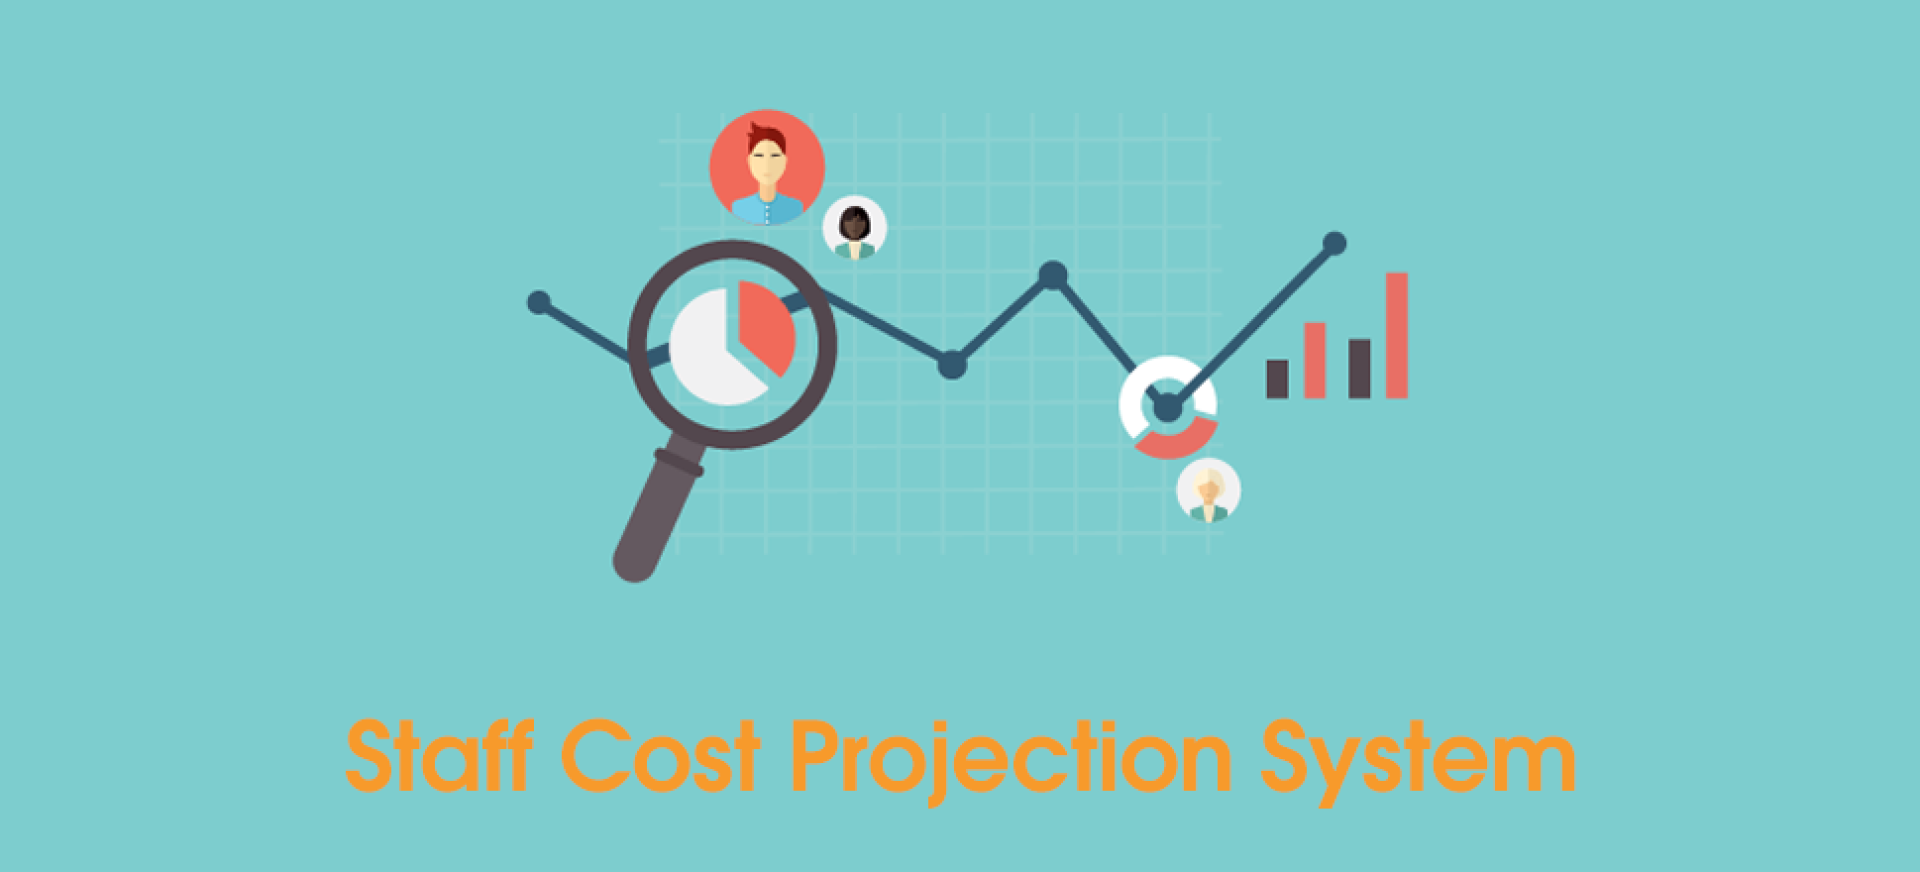 Issue 13 - Staff Cost Projection System